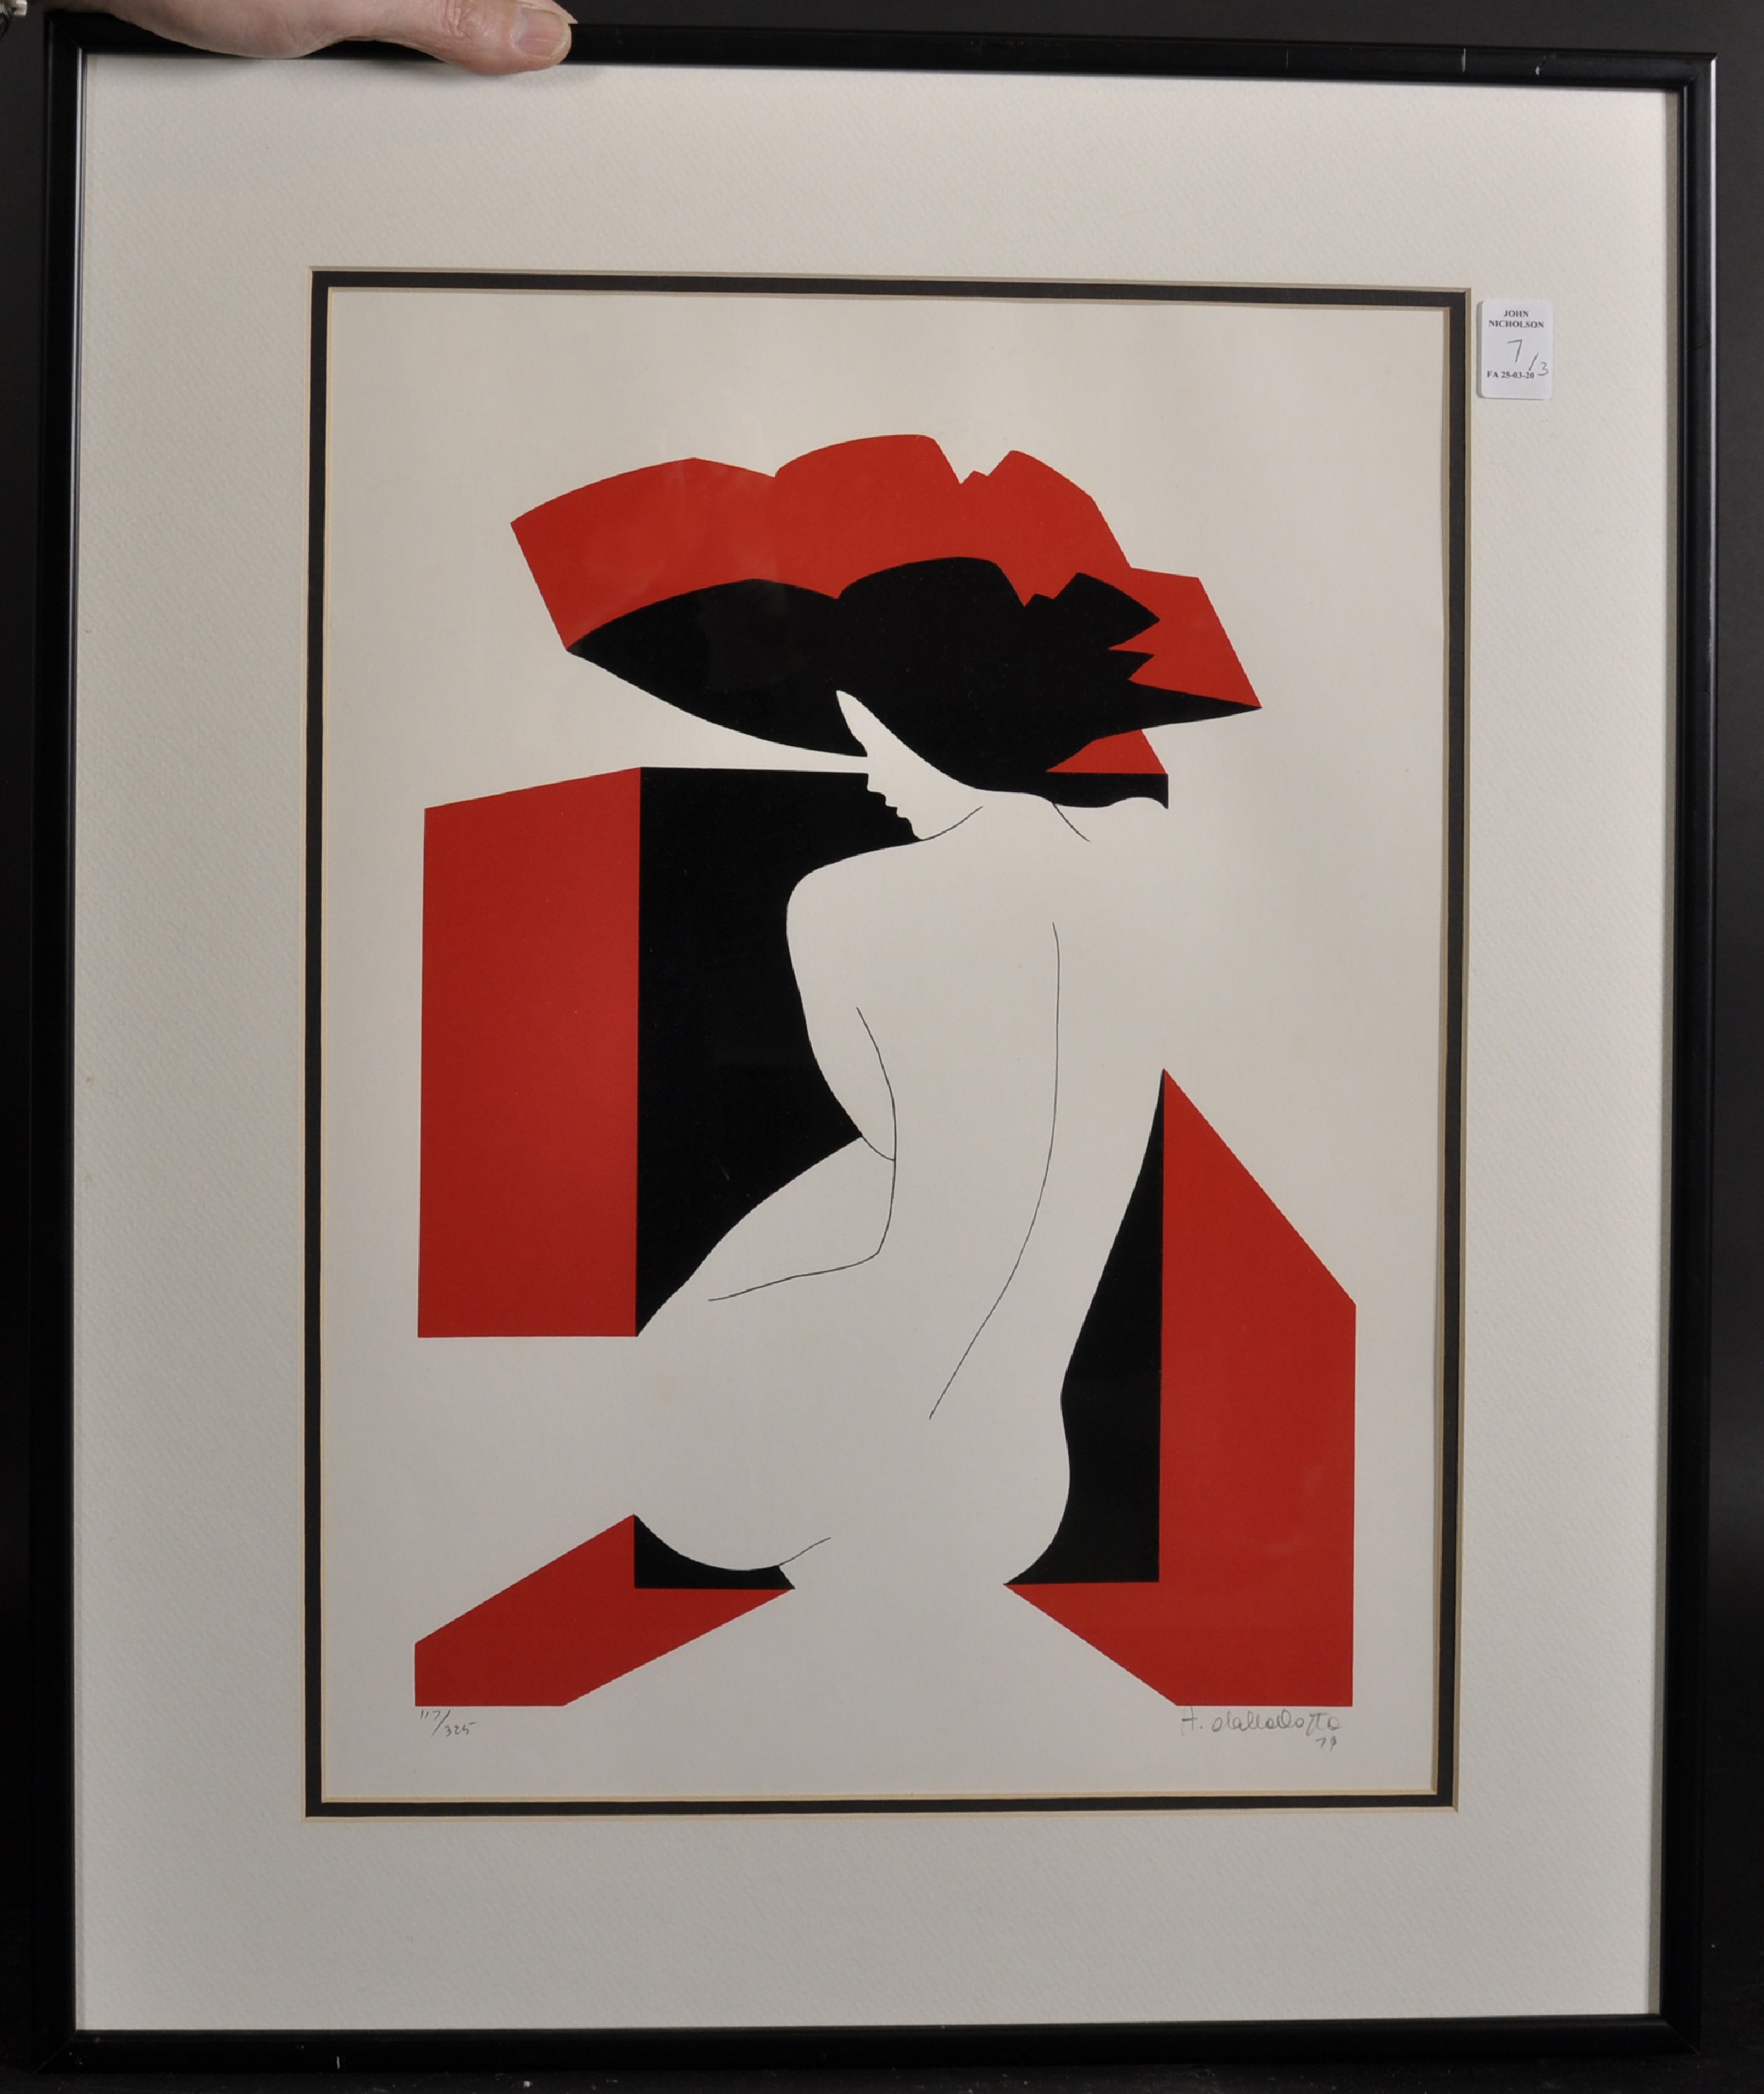 Amleto Costa Dalla (1929- ) Italian. "Anatomy- Face", Screenprint, Signed, Dated '79, and Numbered - Image 3 of 10